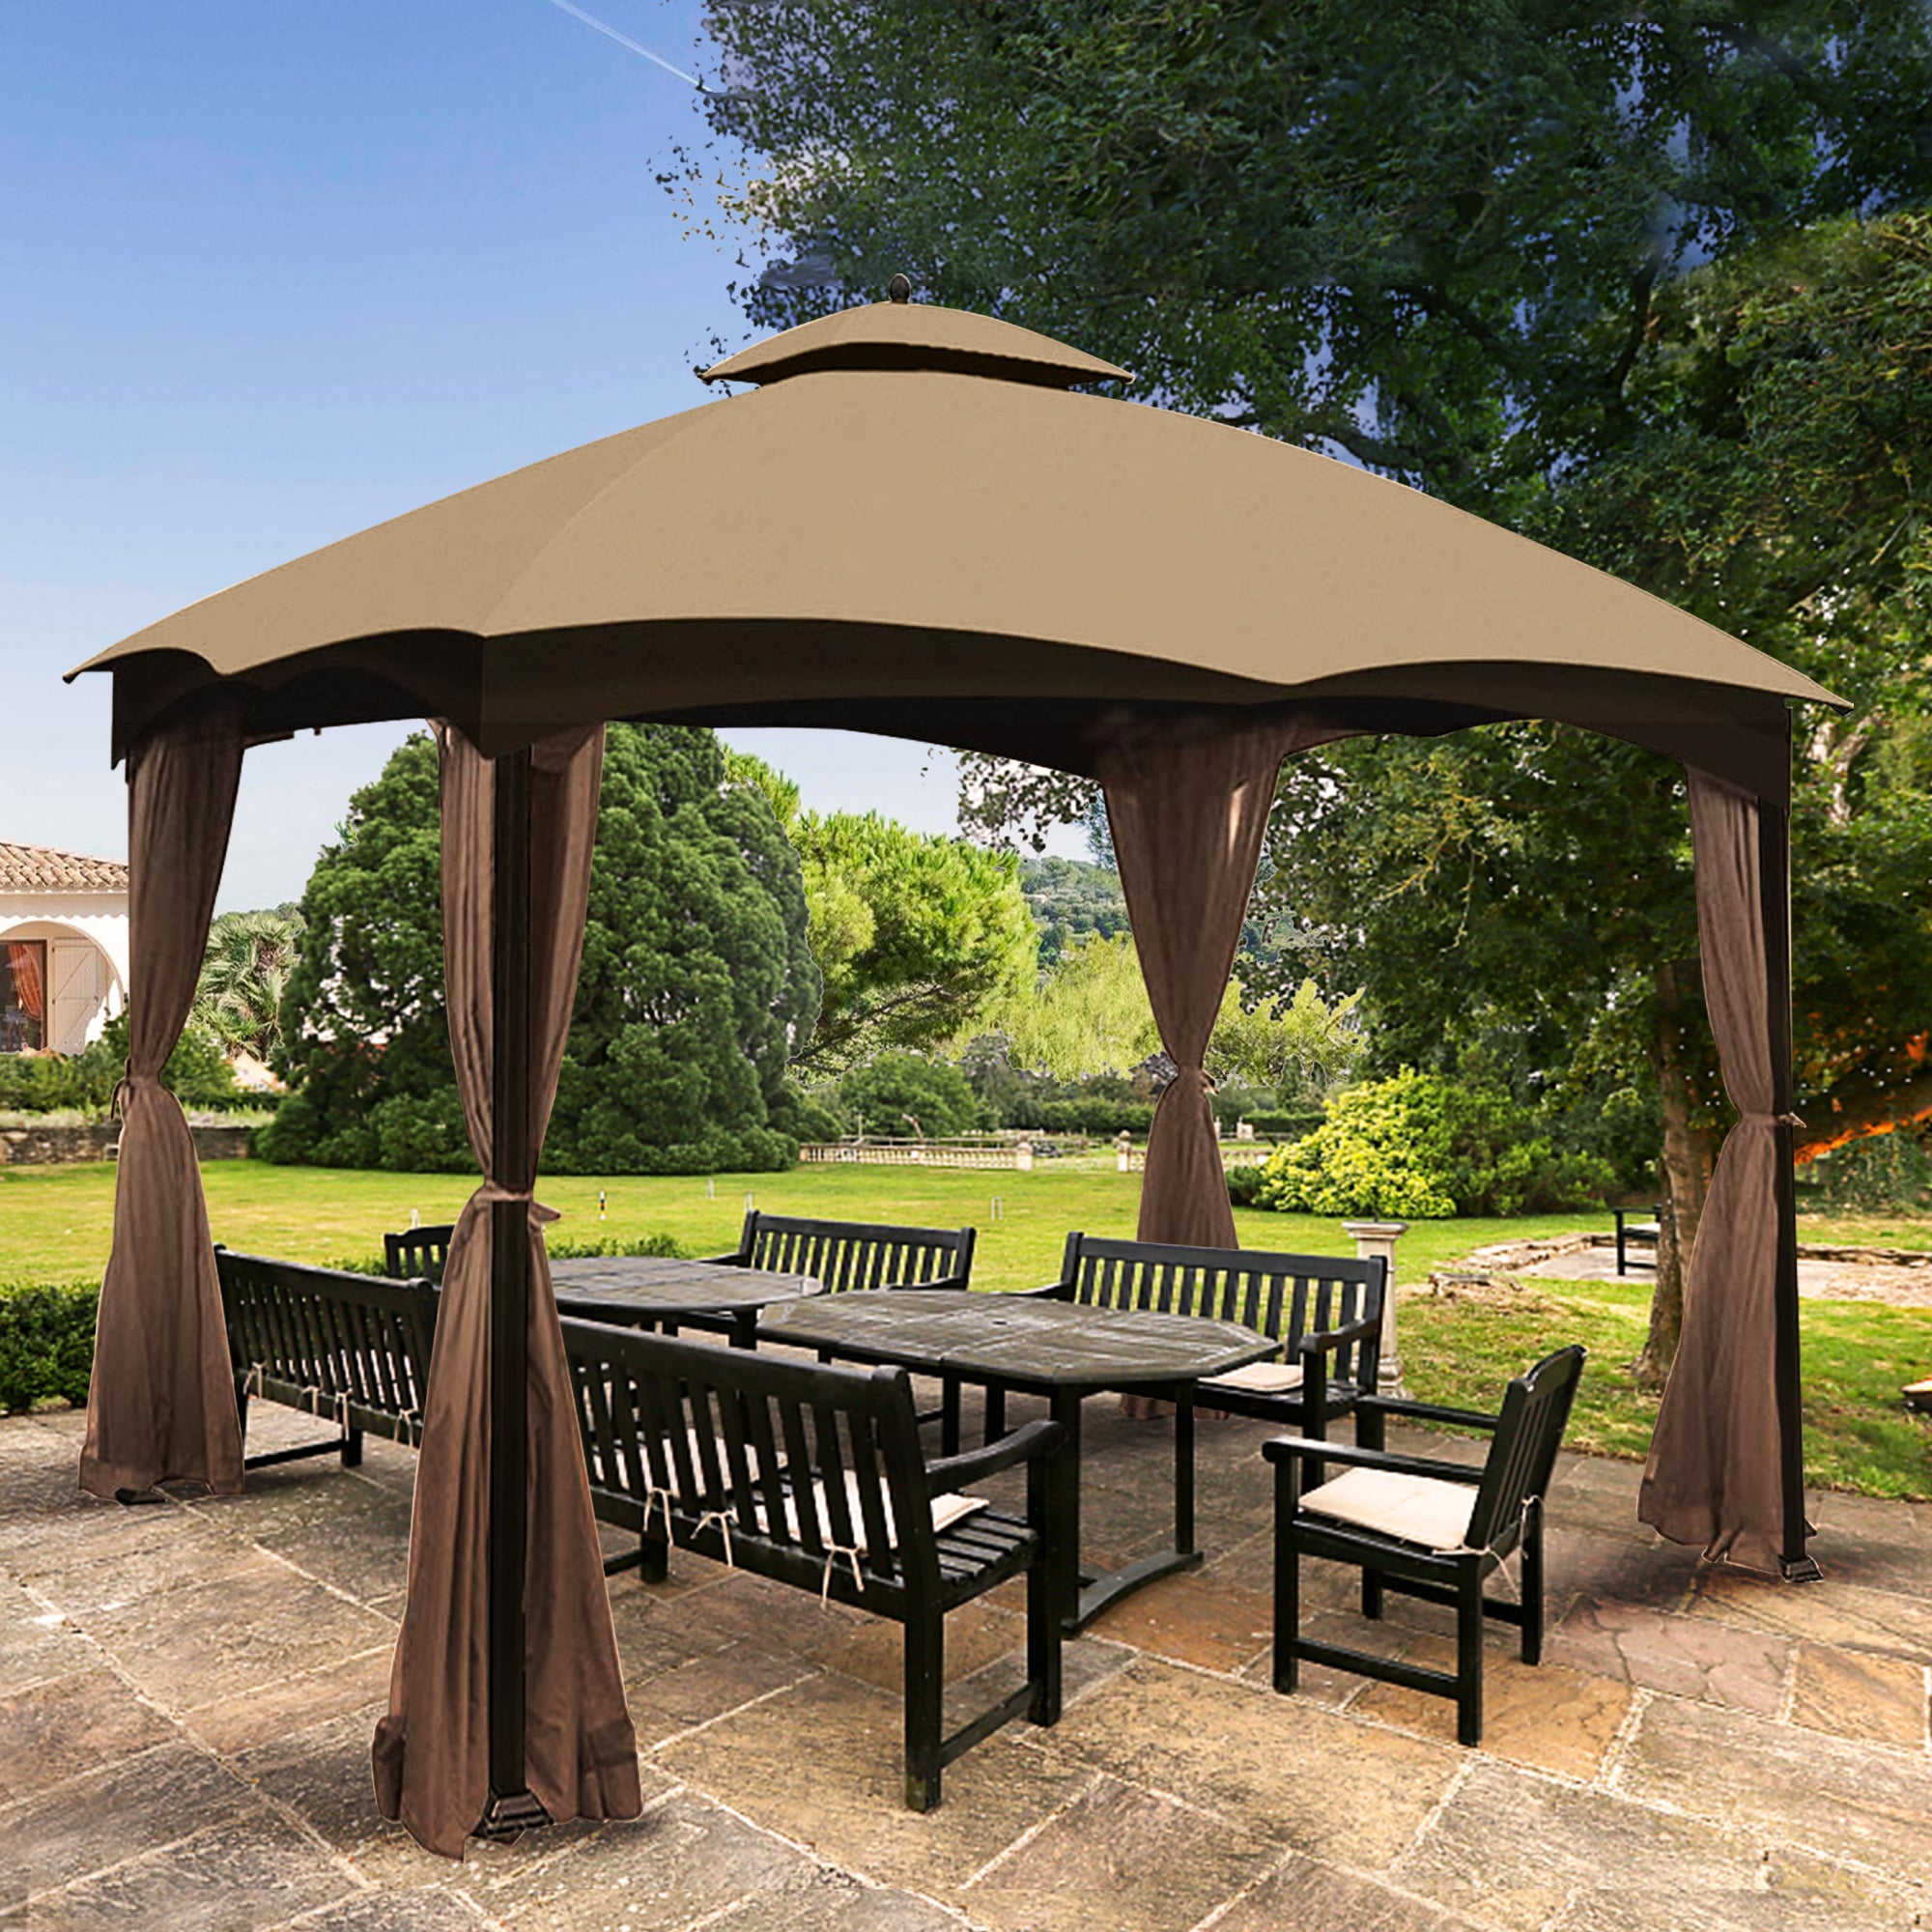 OLILAWN 10' x 12' Gazebo Replacement 2-tier Canopy Top